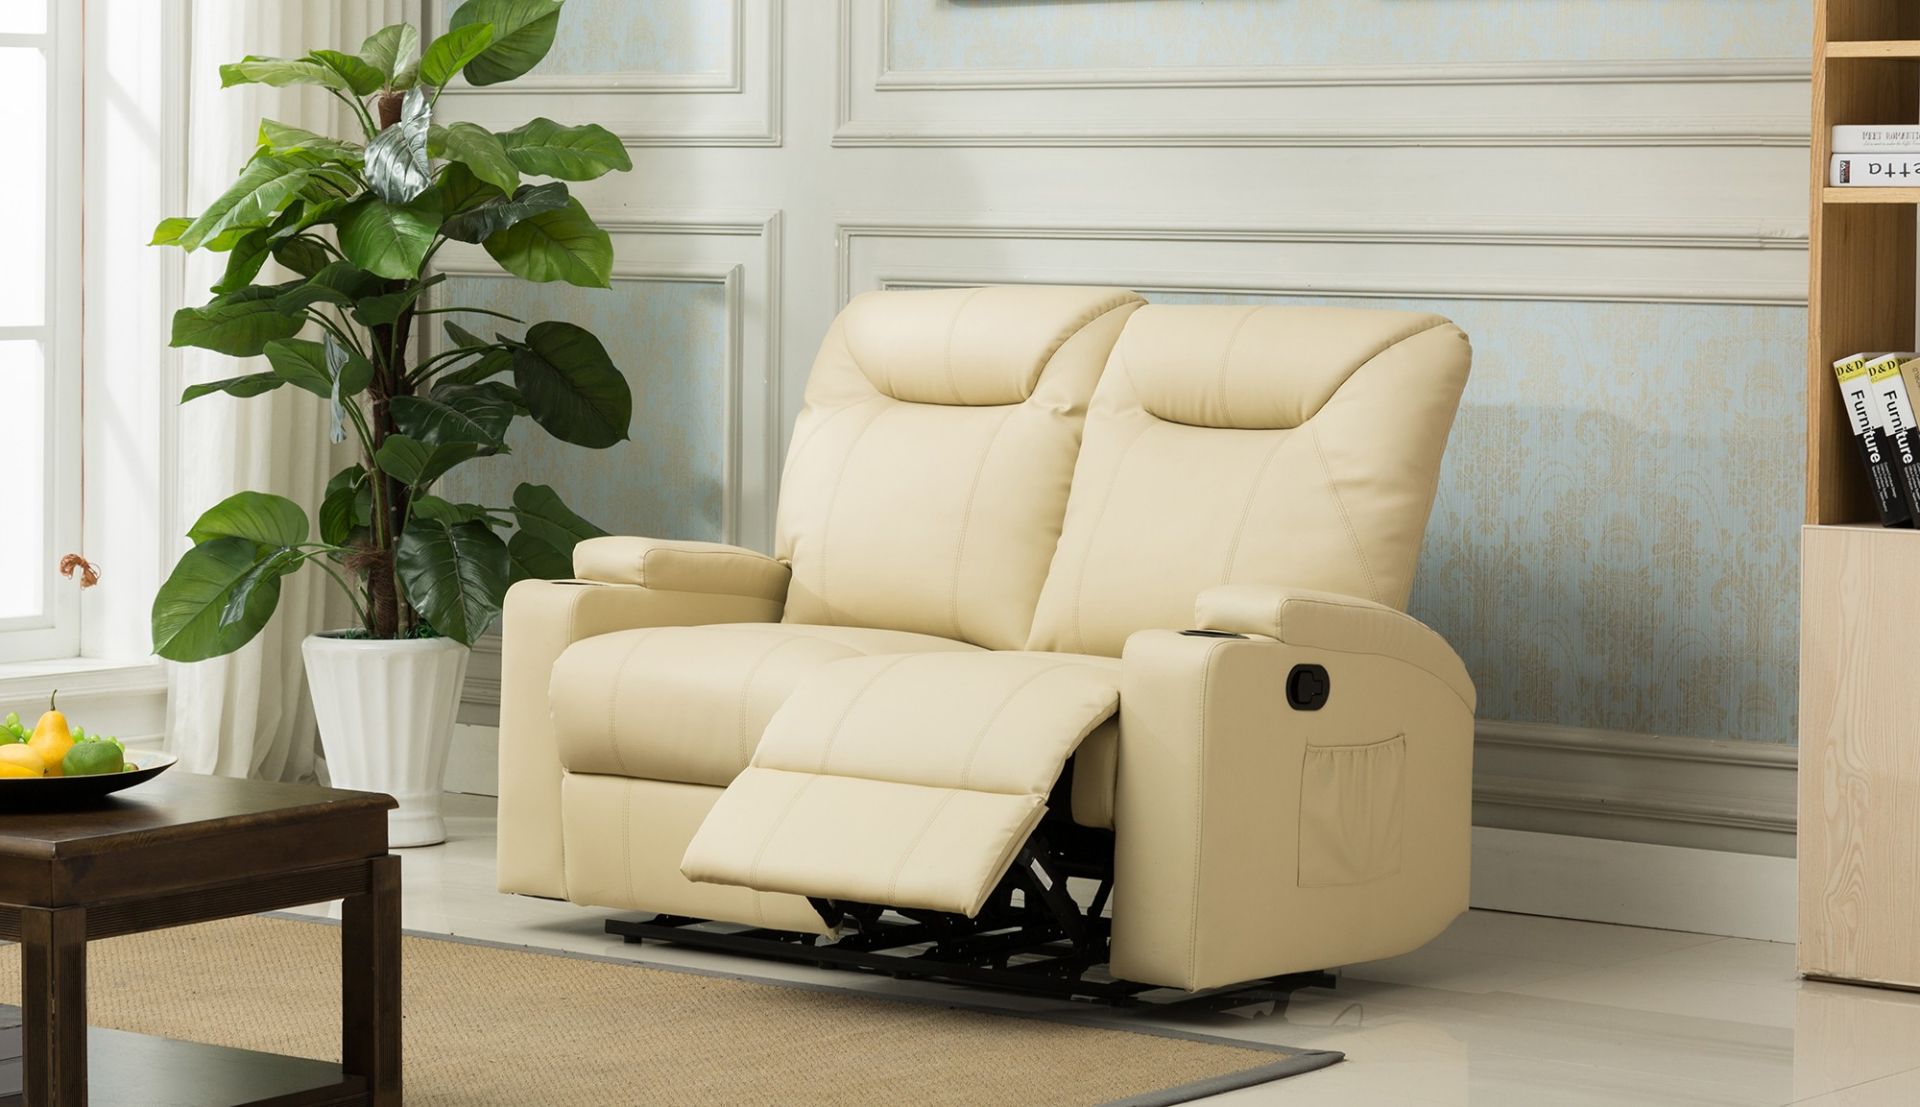 Brand New Boxed 3 Seater Plus 2 Seater Lazyboy Cream Leather Manual Reclining Sofas - Image 3 of 3